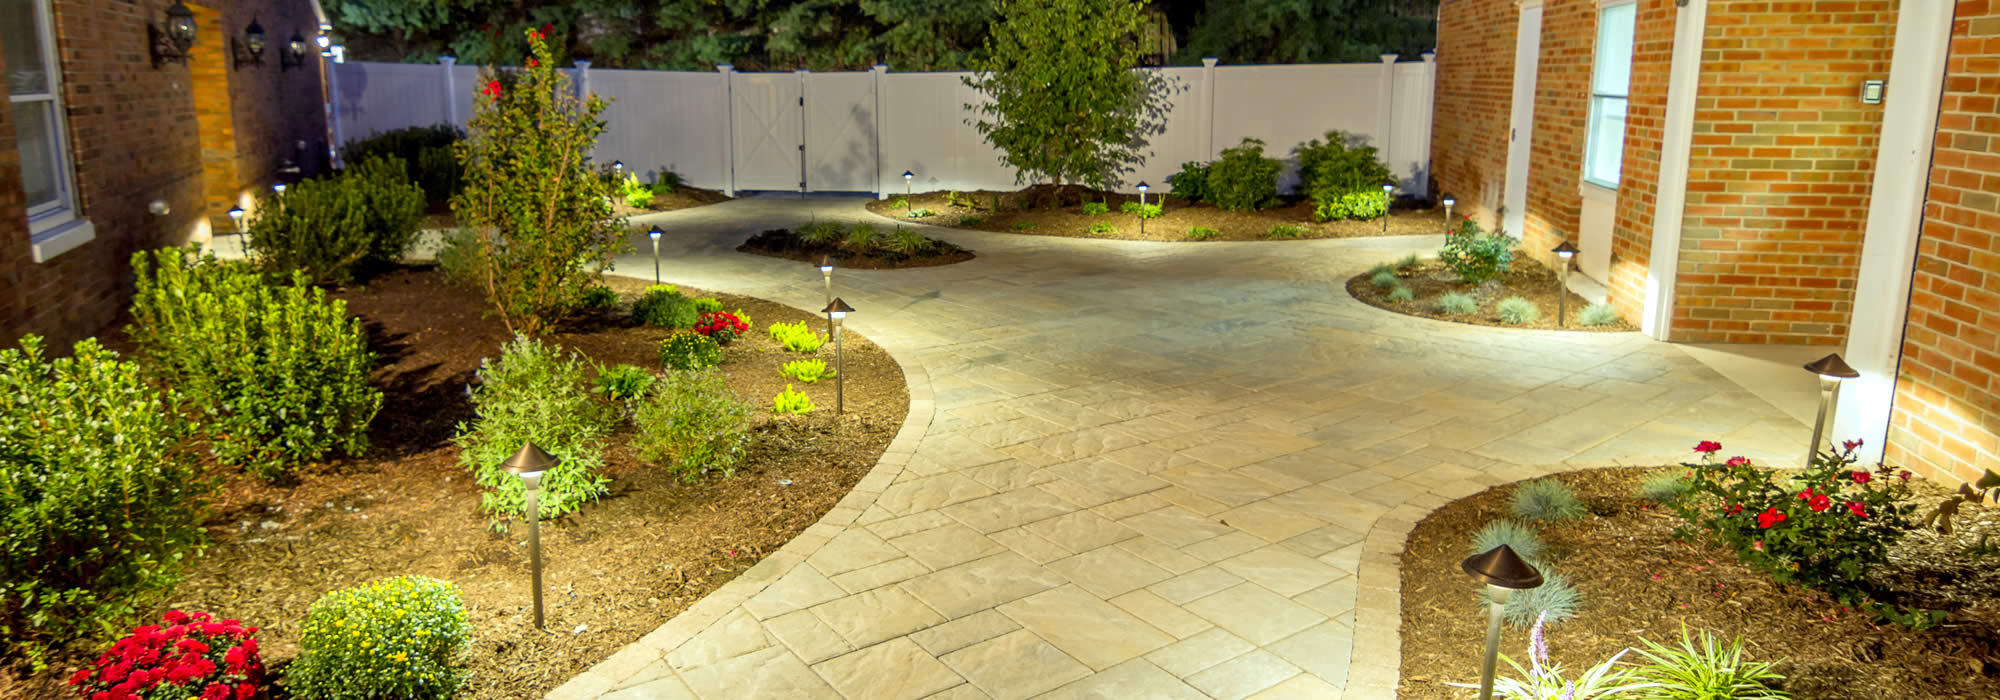 Landscaping Services in Shorewood Hills